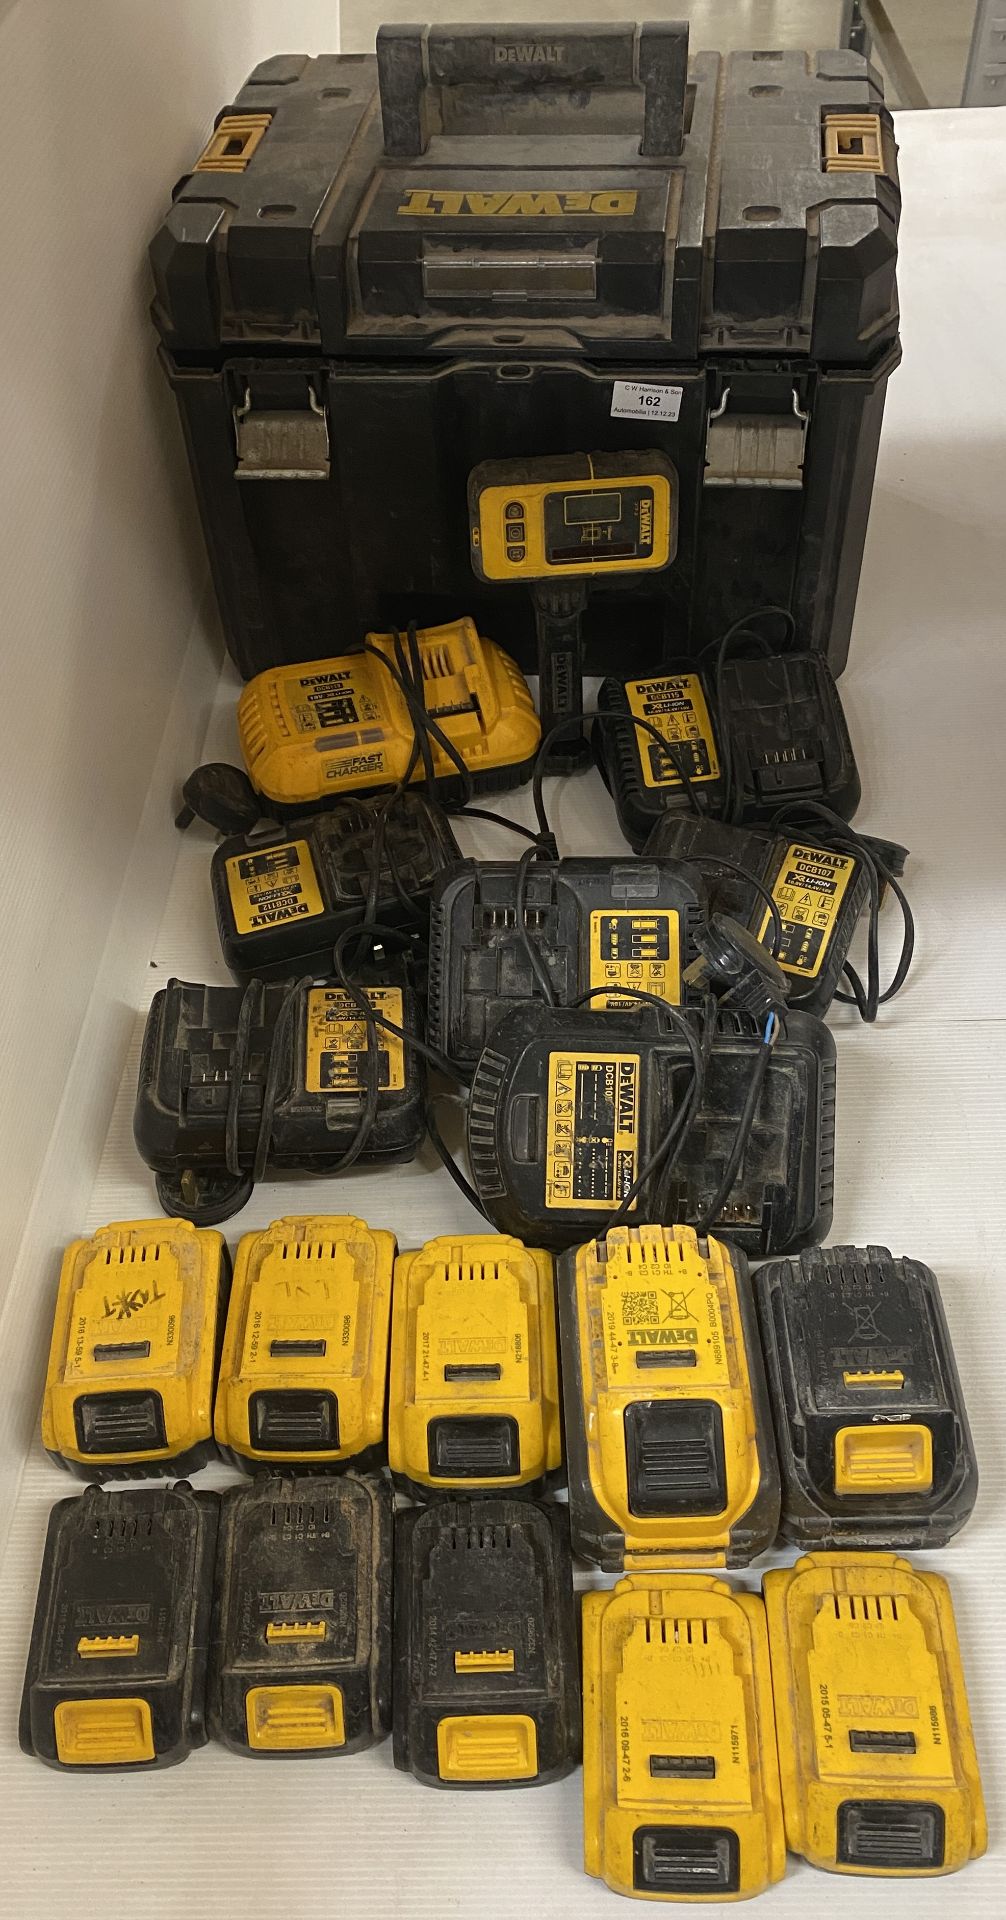 Contents to case - 6 x DeWalt battery chargers and 10 x assorted batteries (sold as seen) (saleroom